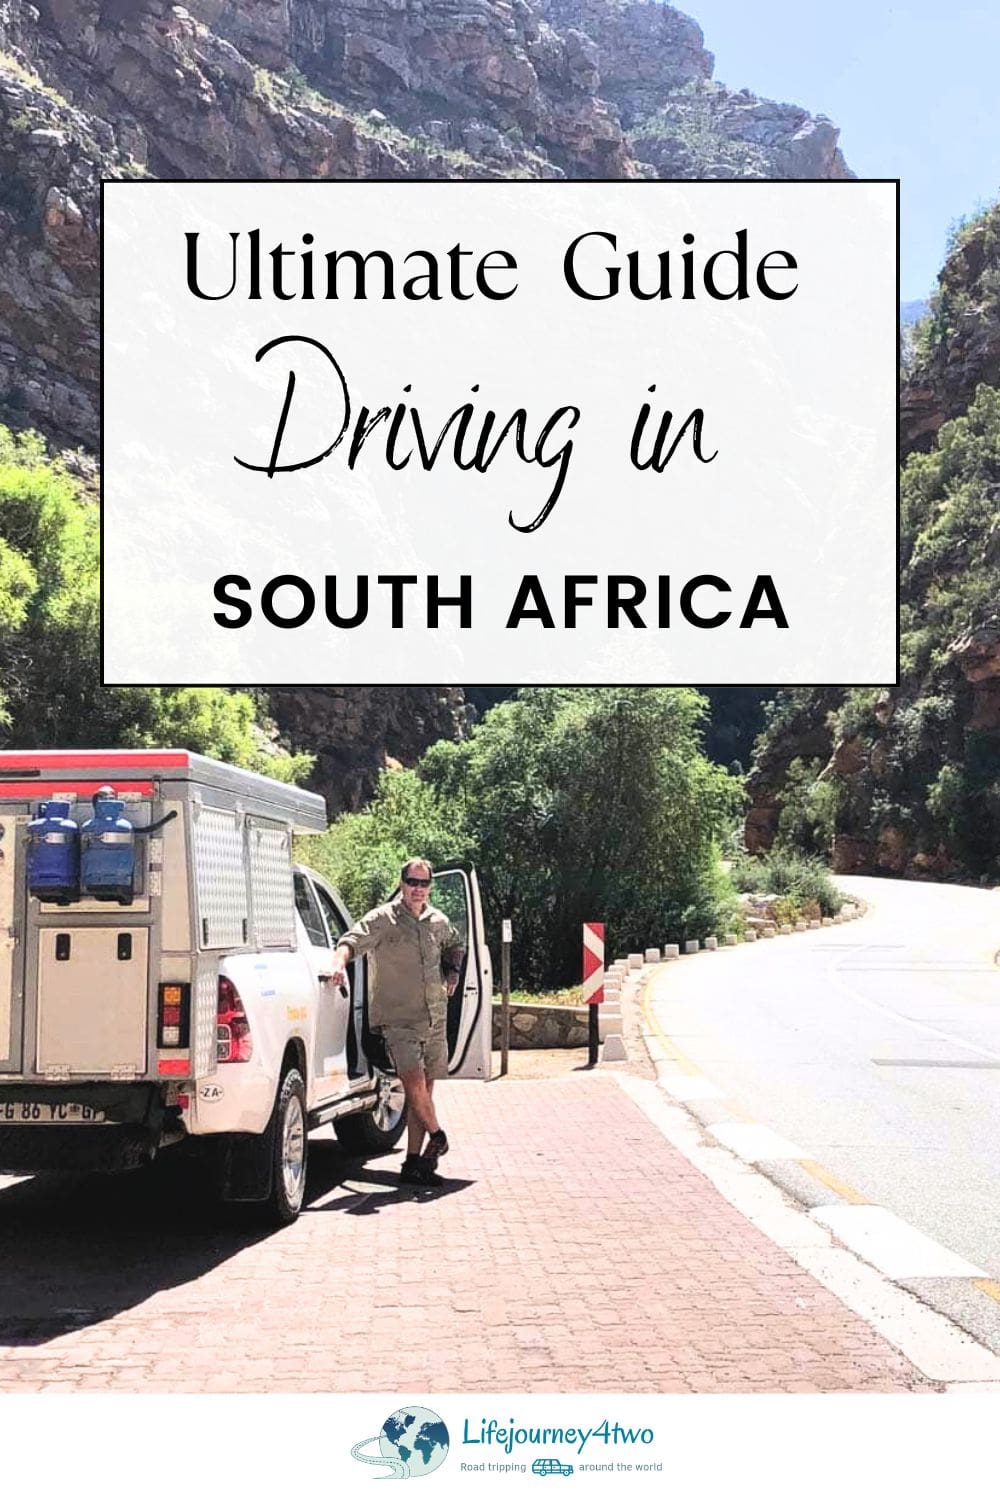 Driving in South Africa Guide Pinterest pin